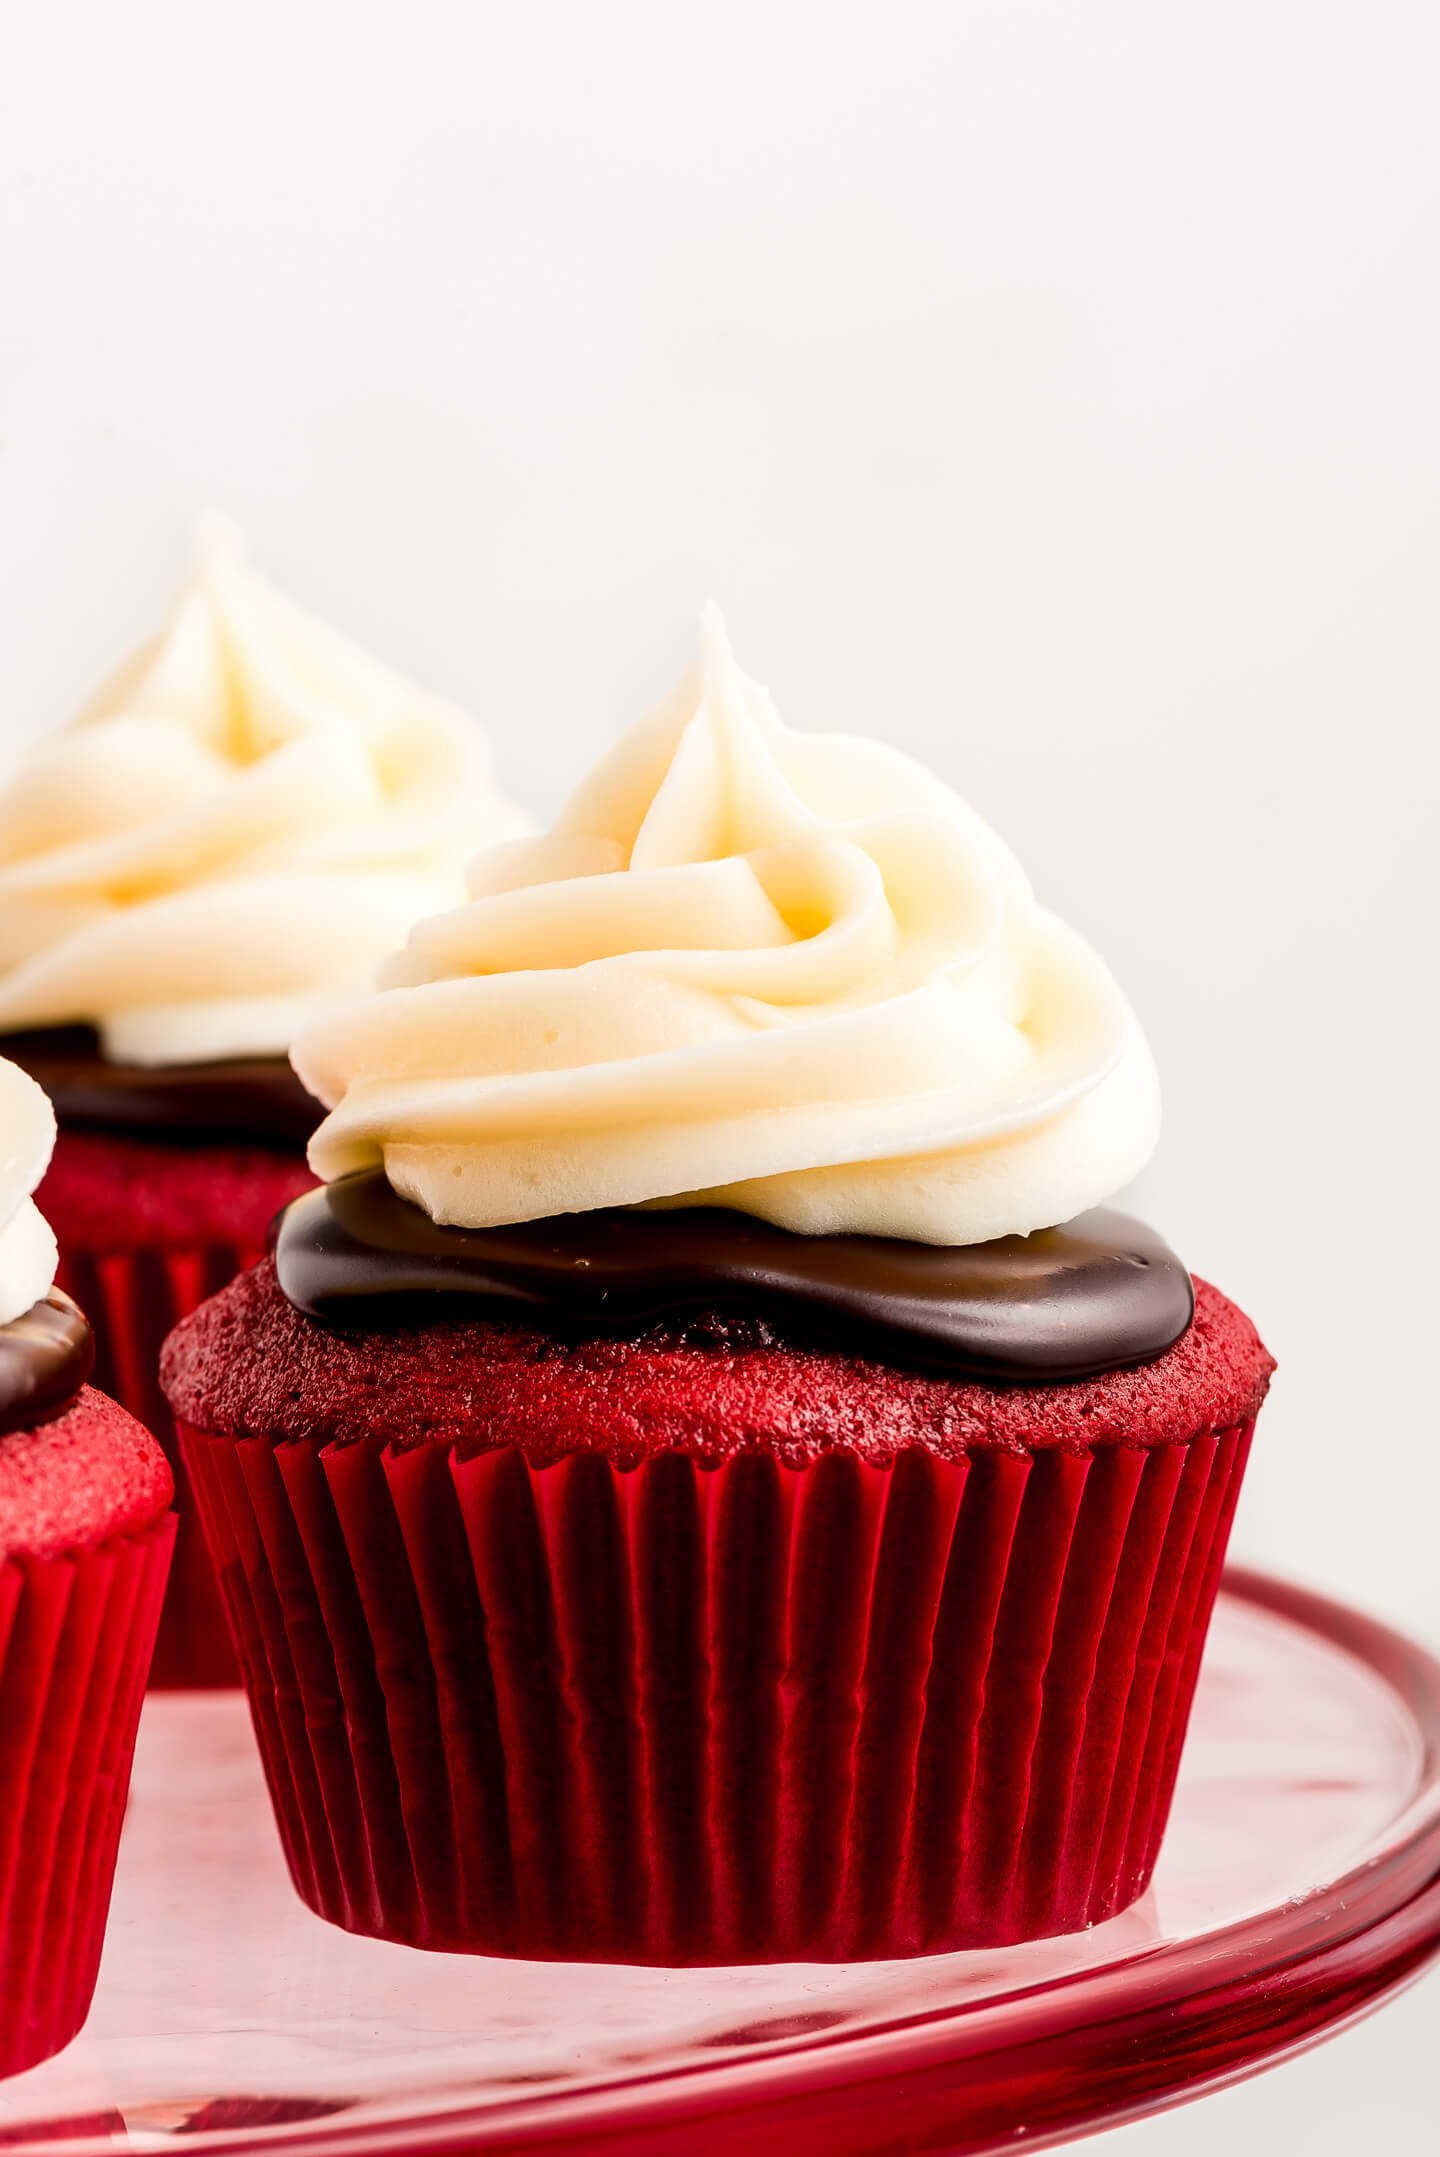 Close up shot of a Red Velvet Cupcake topped with dark chocolate ganache and a swirl of Cream Cheese Frosting.